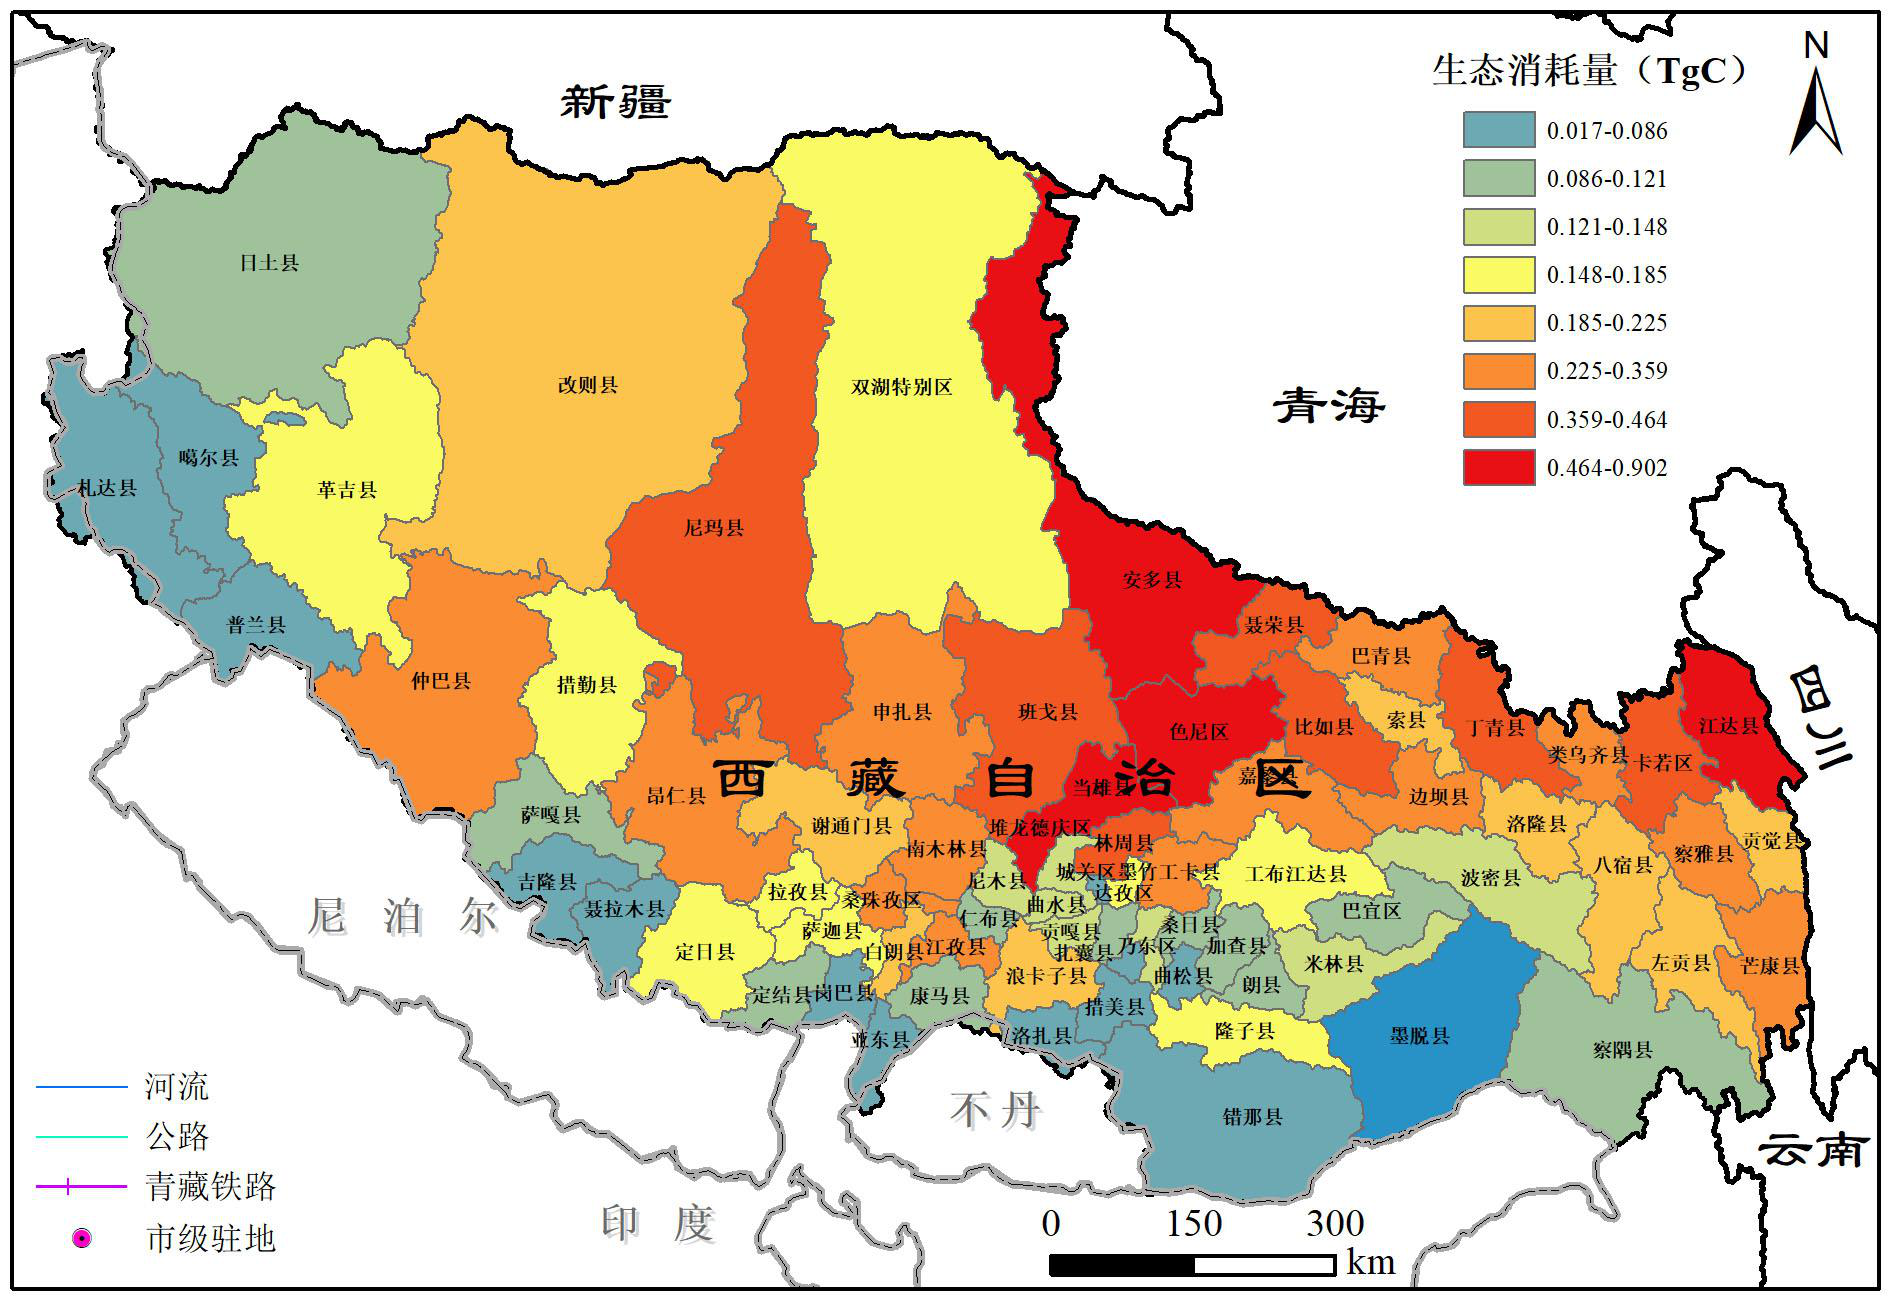 Data set of ecological resource consumption in Tibet (2000-2019)